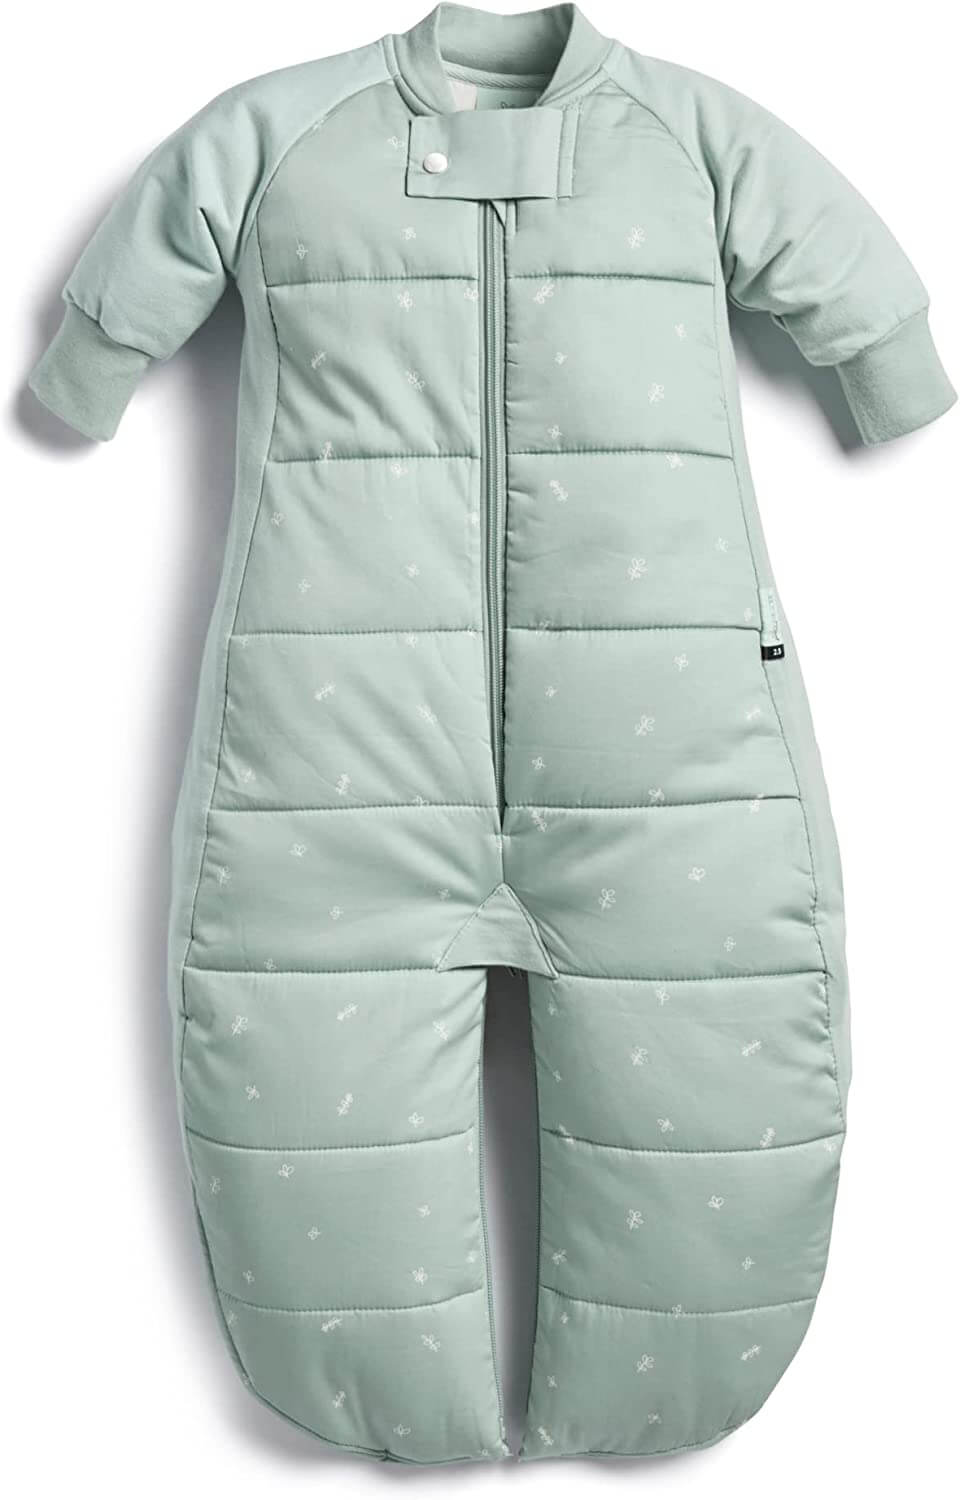 A sleep sack suitable for flying with a baby